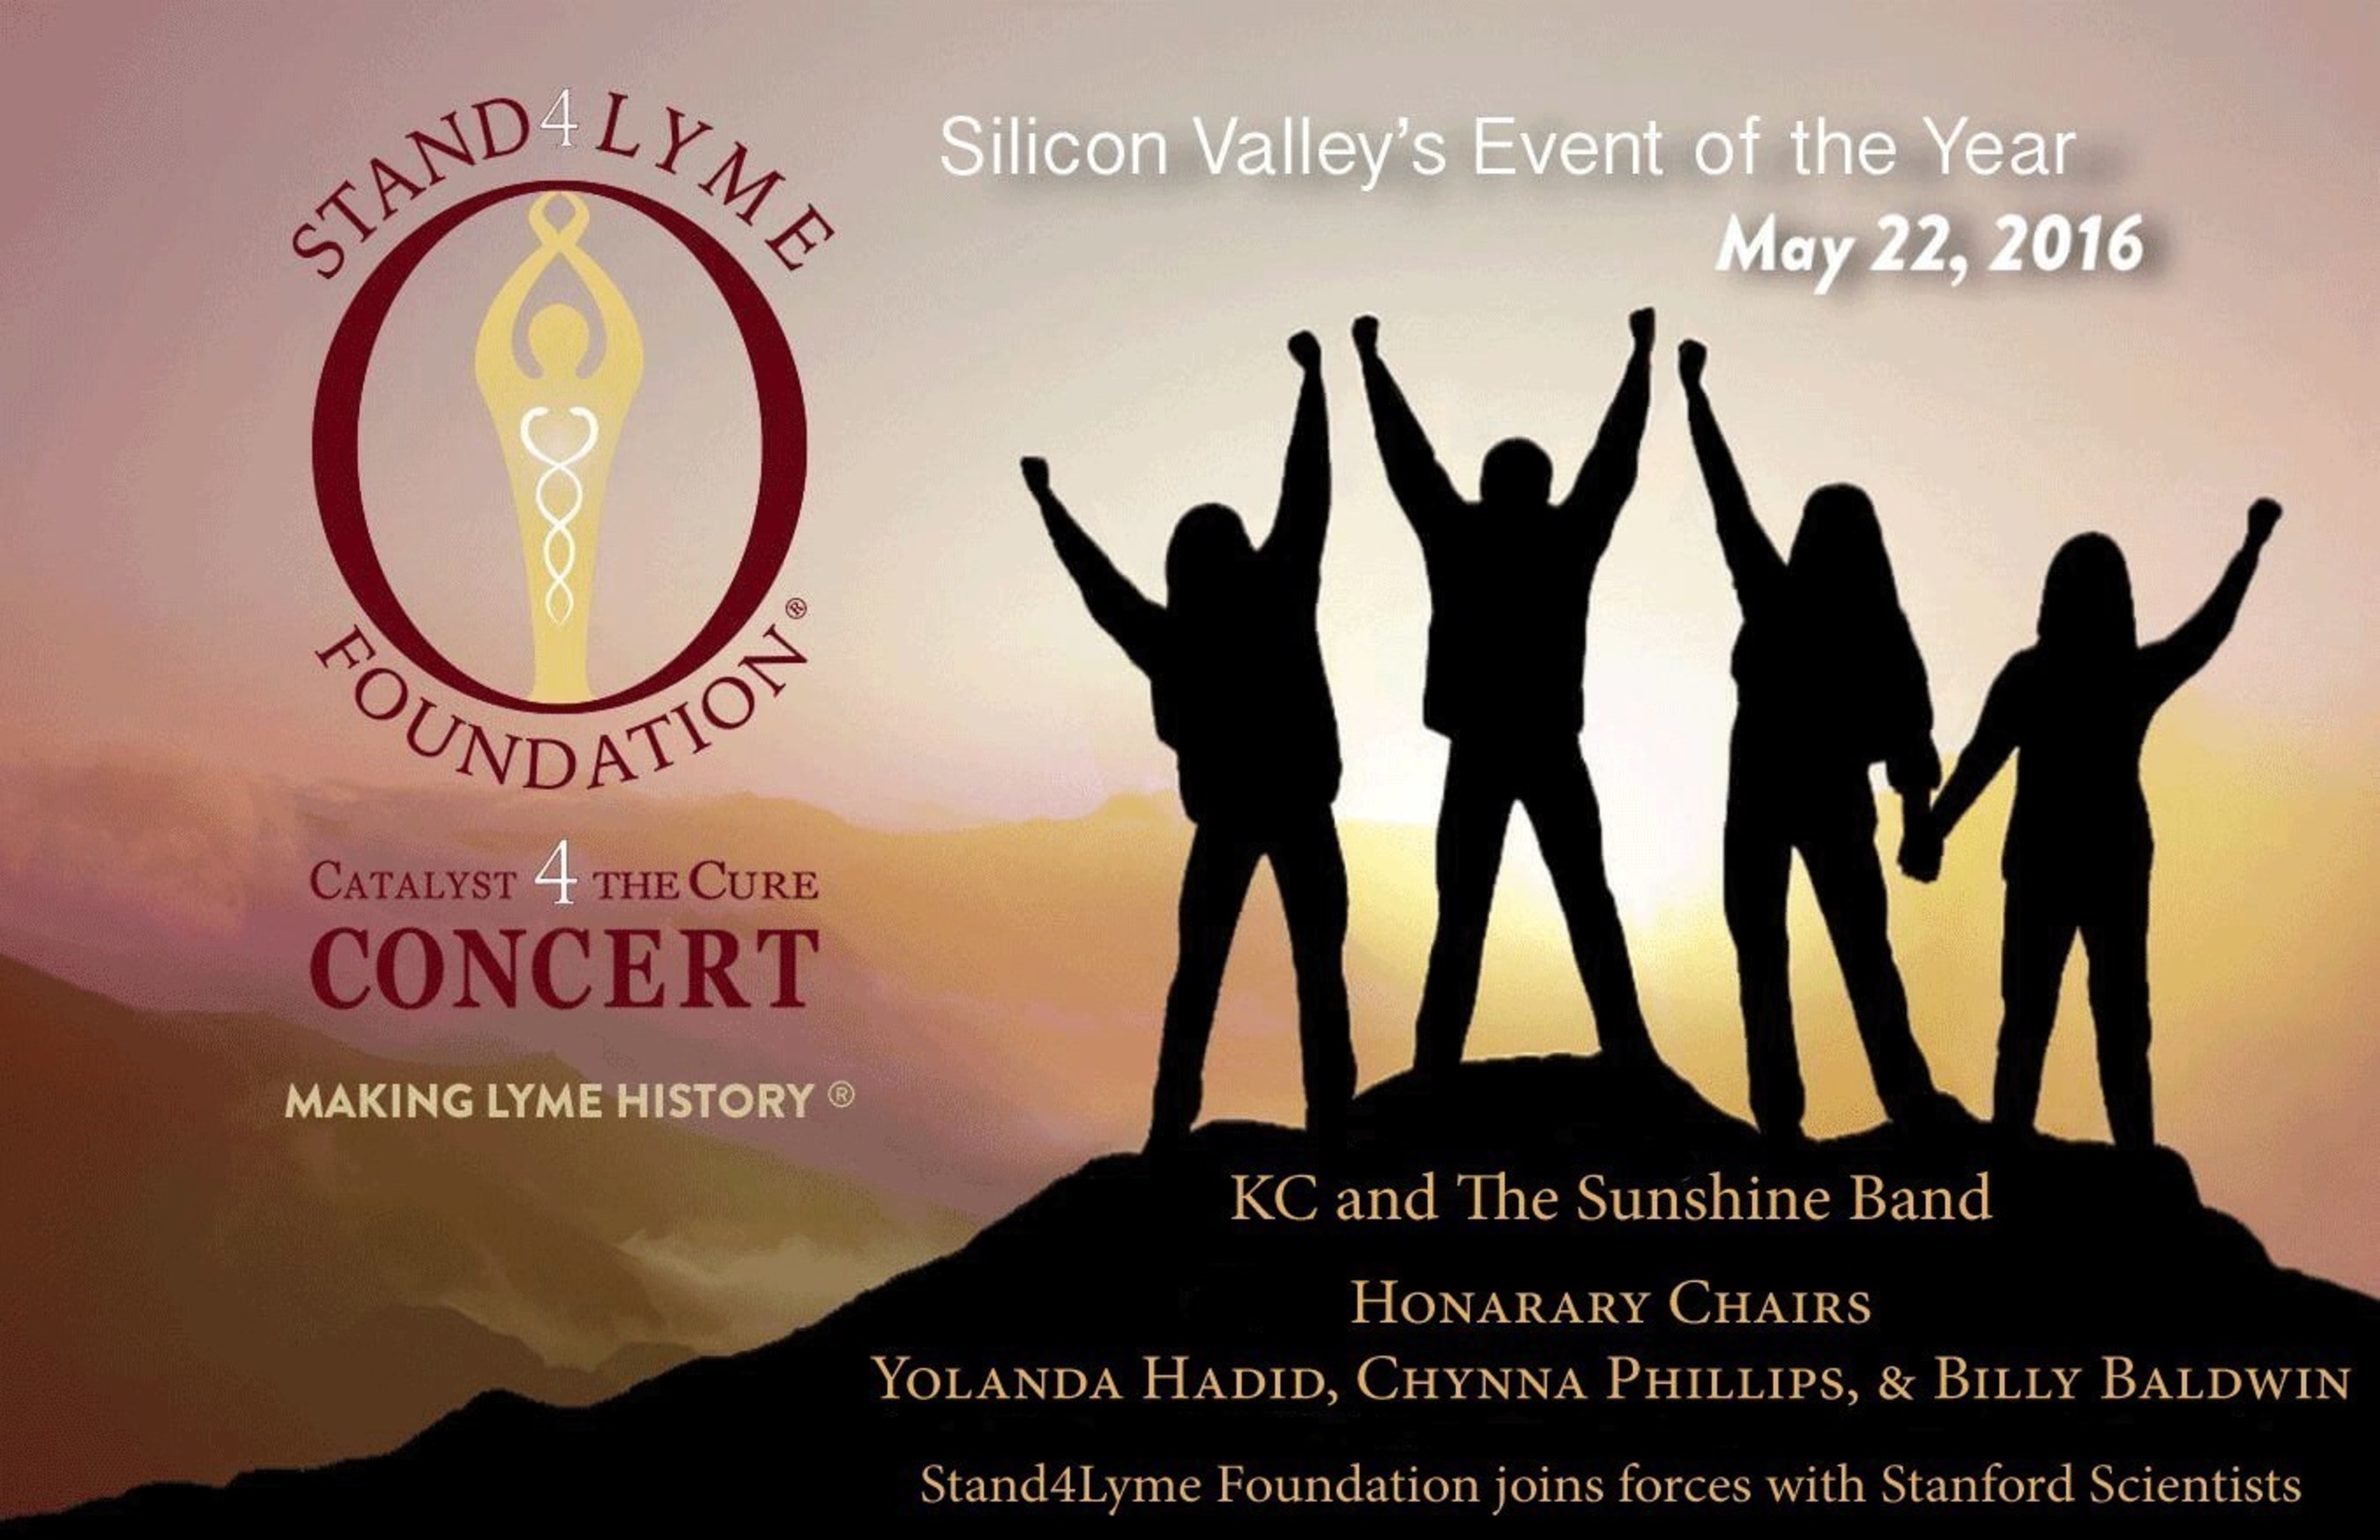 Stand4Lyme's Catalyst 4 The Cure concert